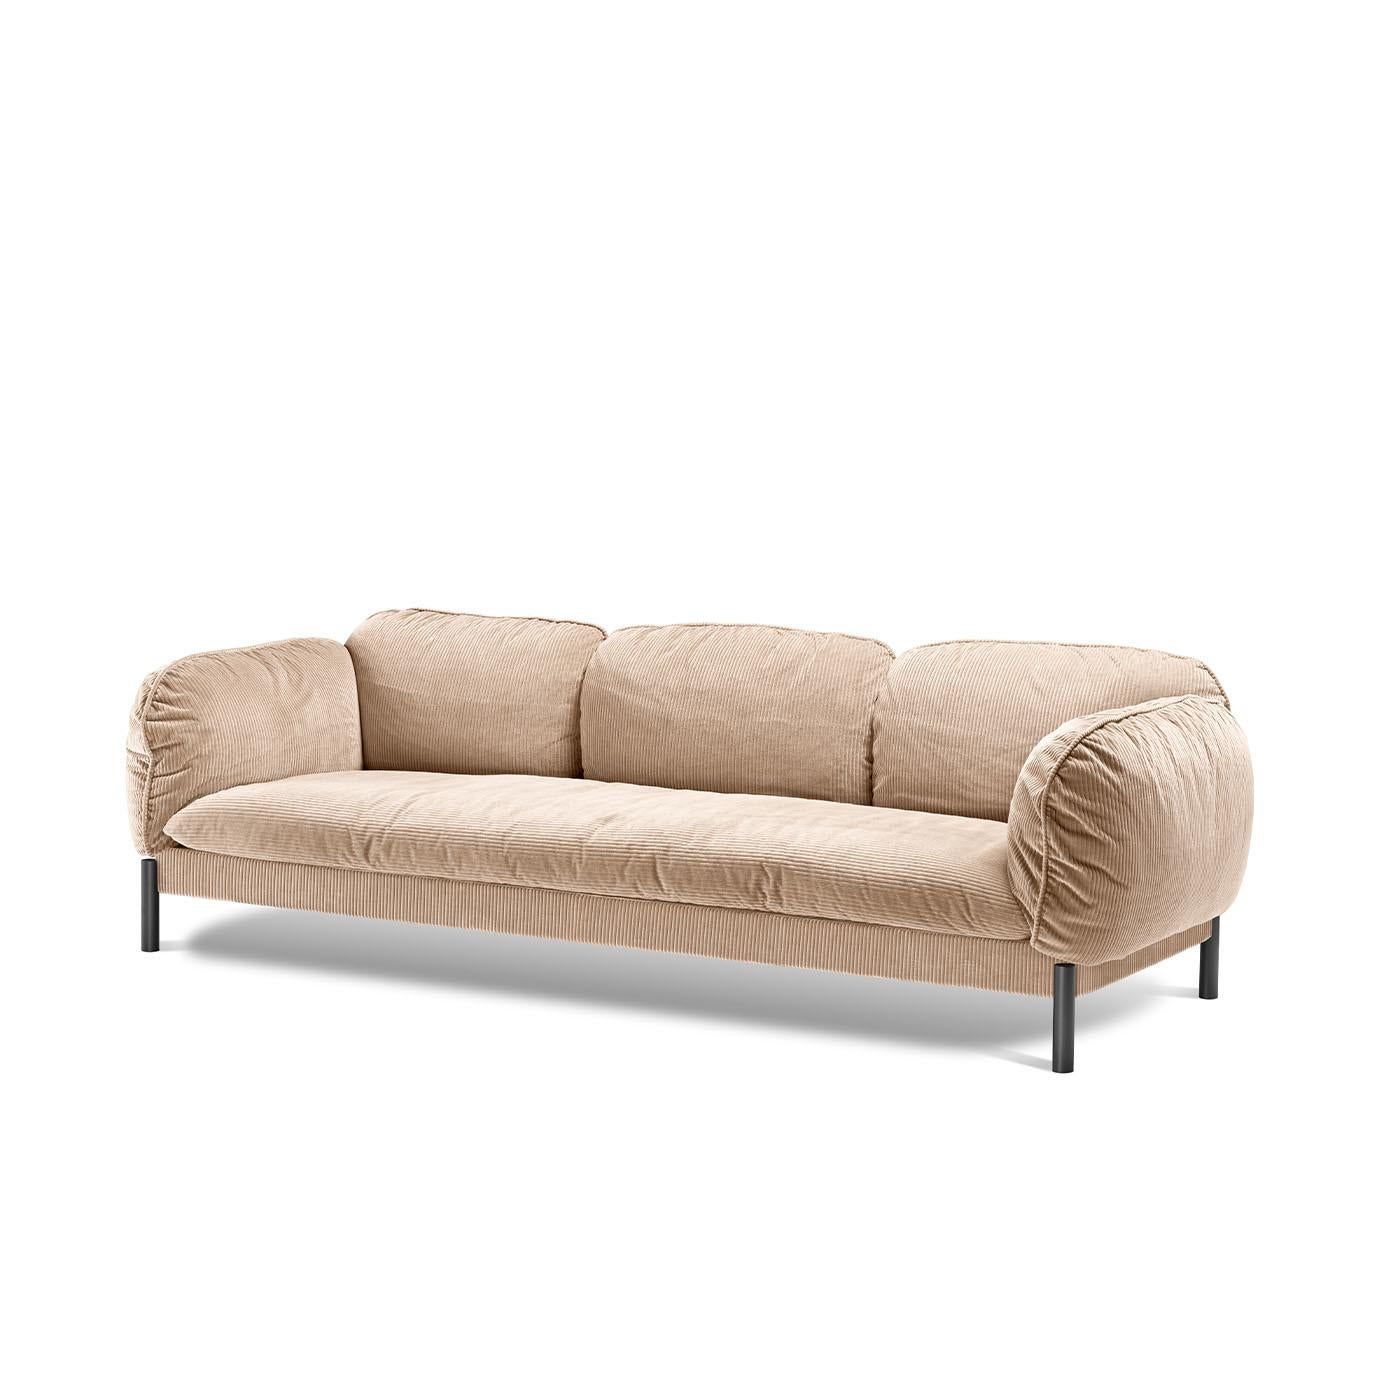 A modern interpretation of an elegant and classic design, this splendid three-seat sofa will make a refined addition to a contemporary interior. Resting on black satin-finished cylindrical feet, it boasts a comfortable, welcoming silhouette that is